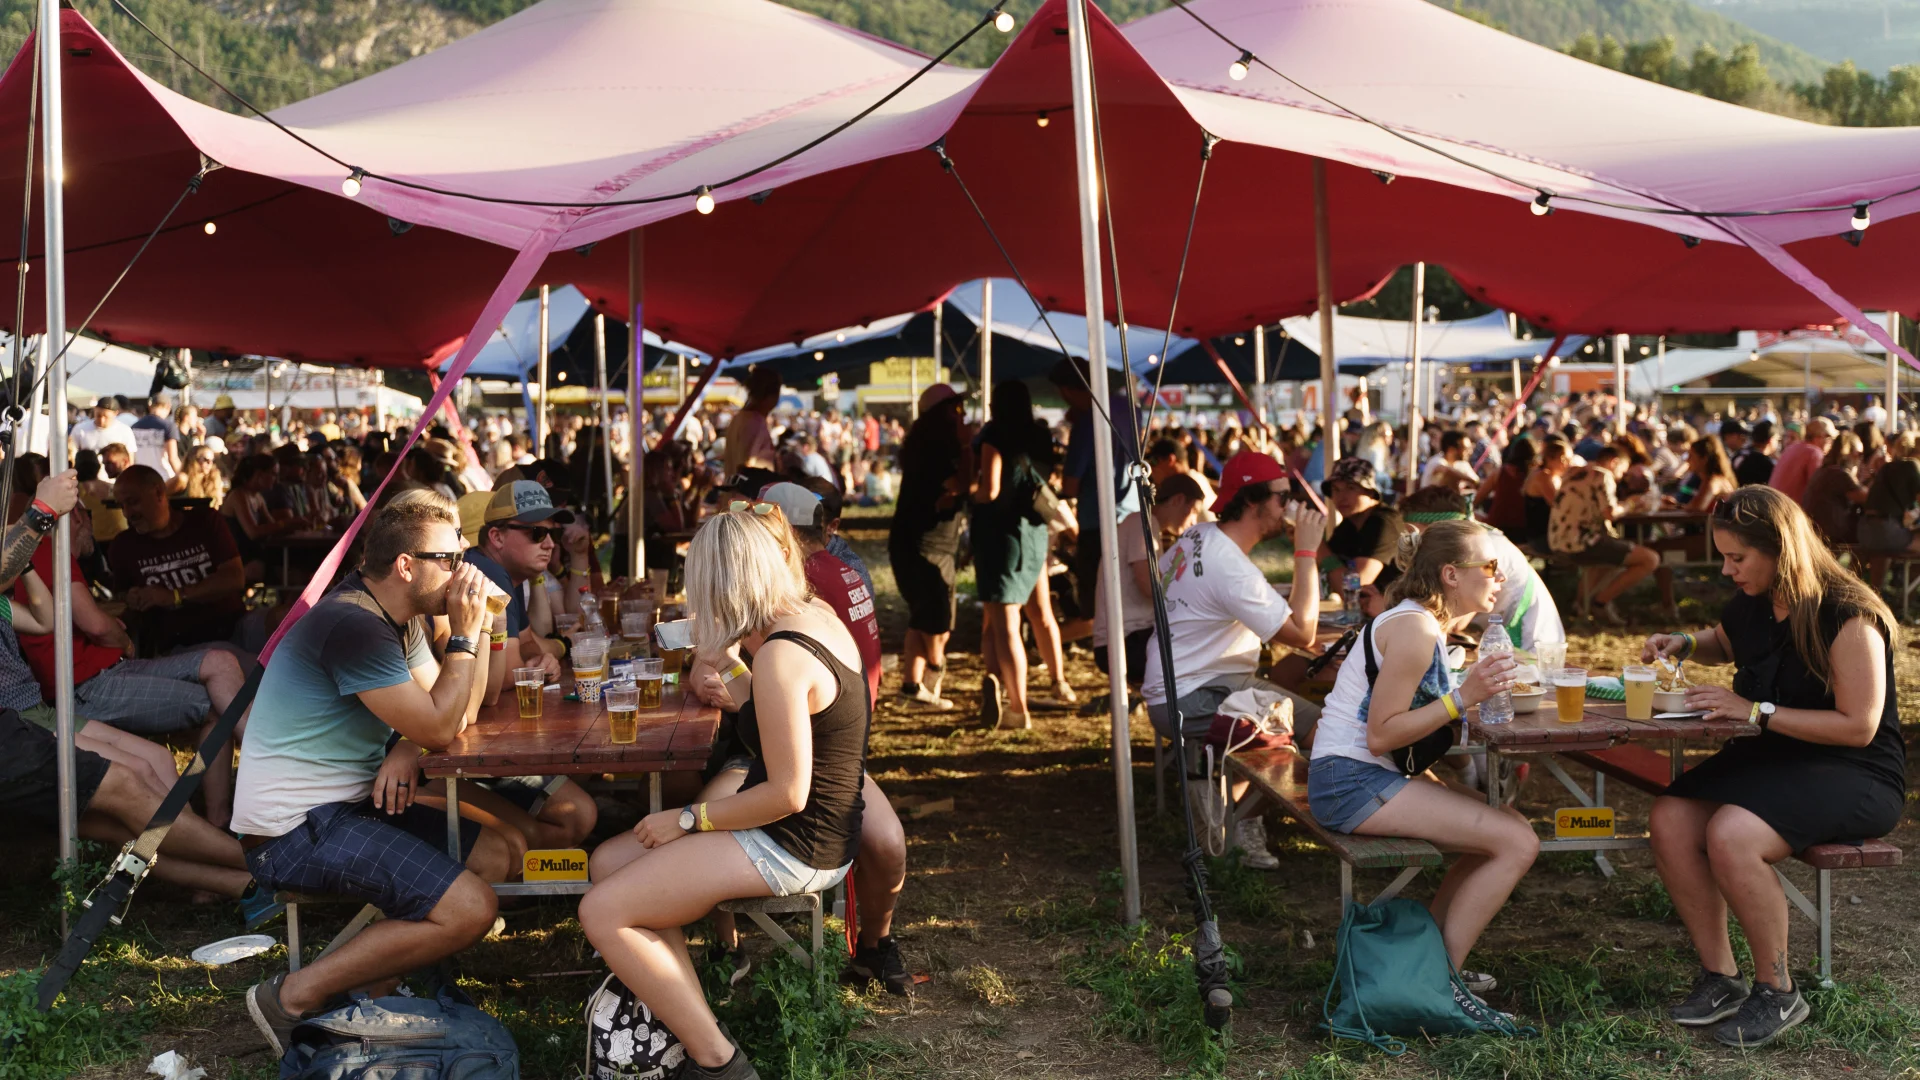 Food tent at the Openair with guests